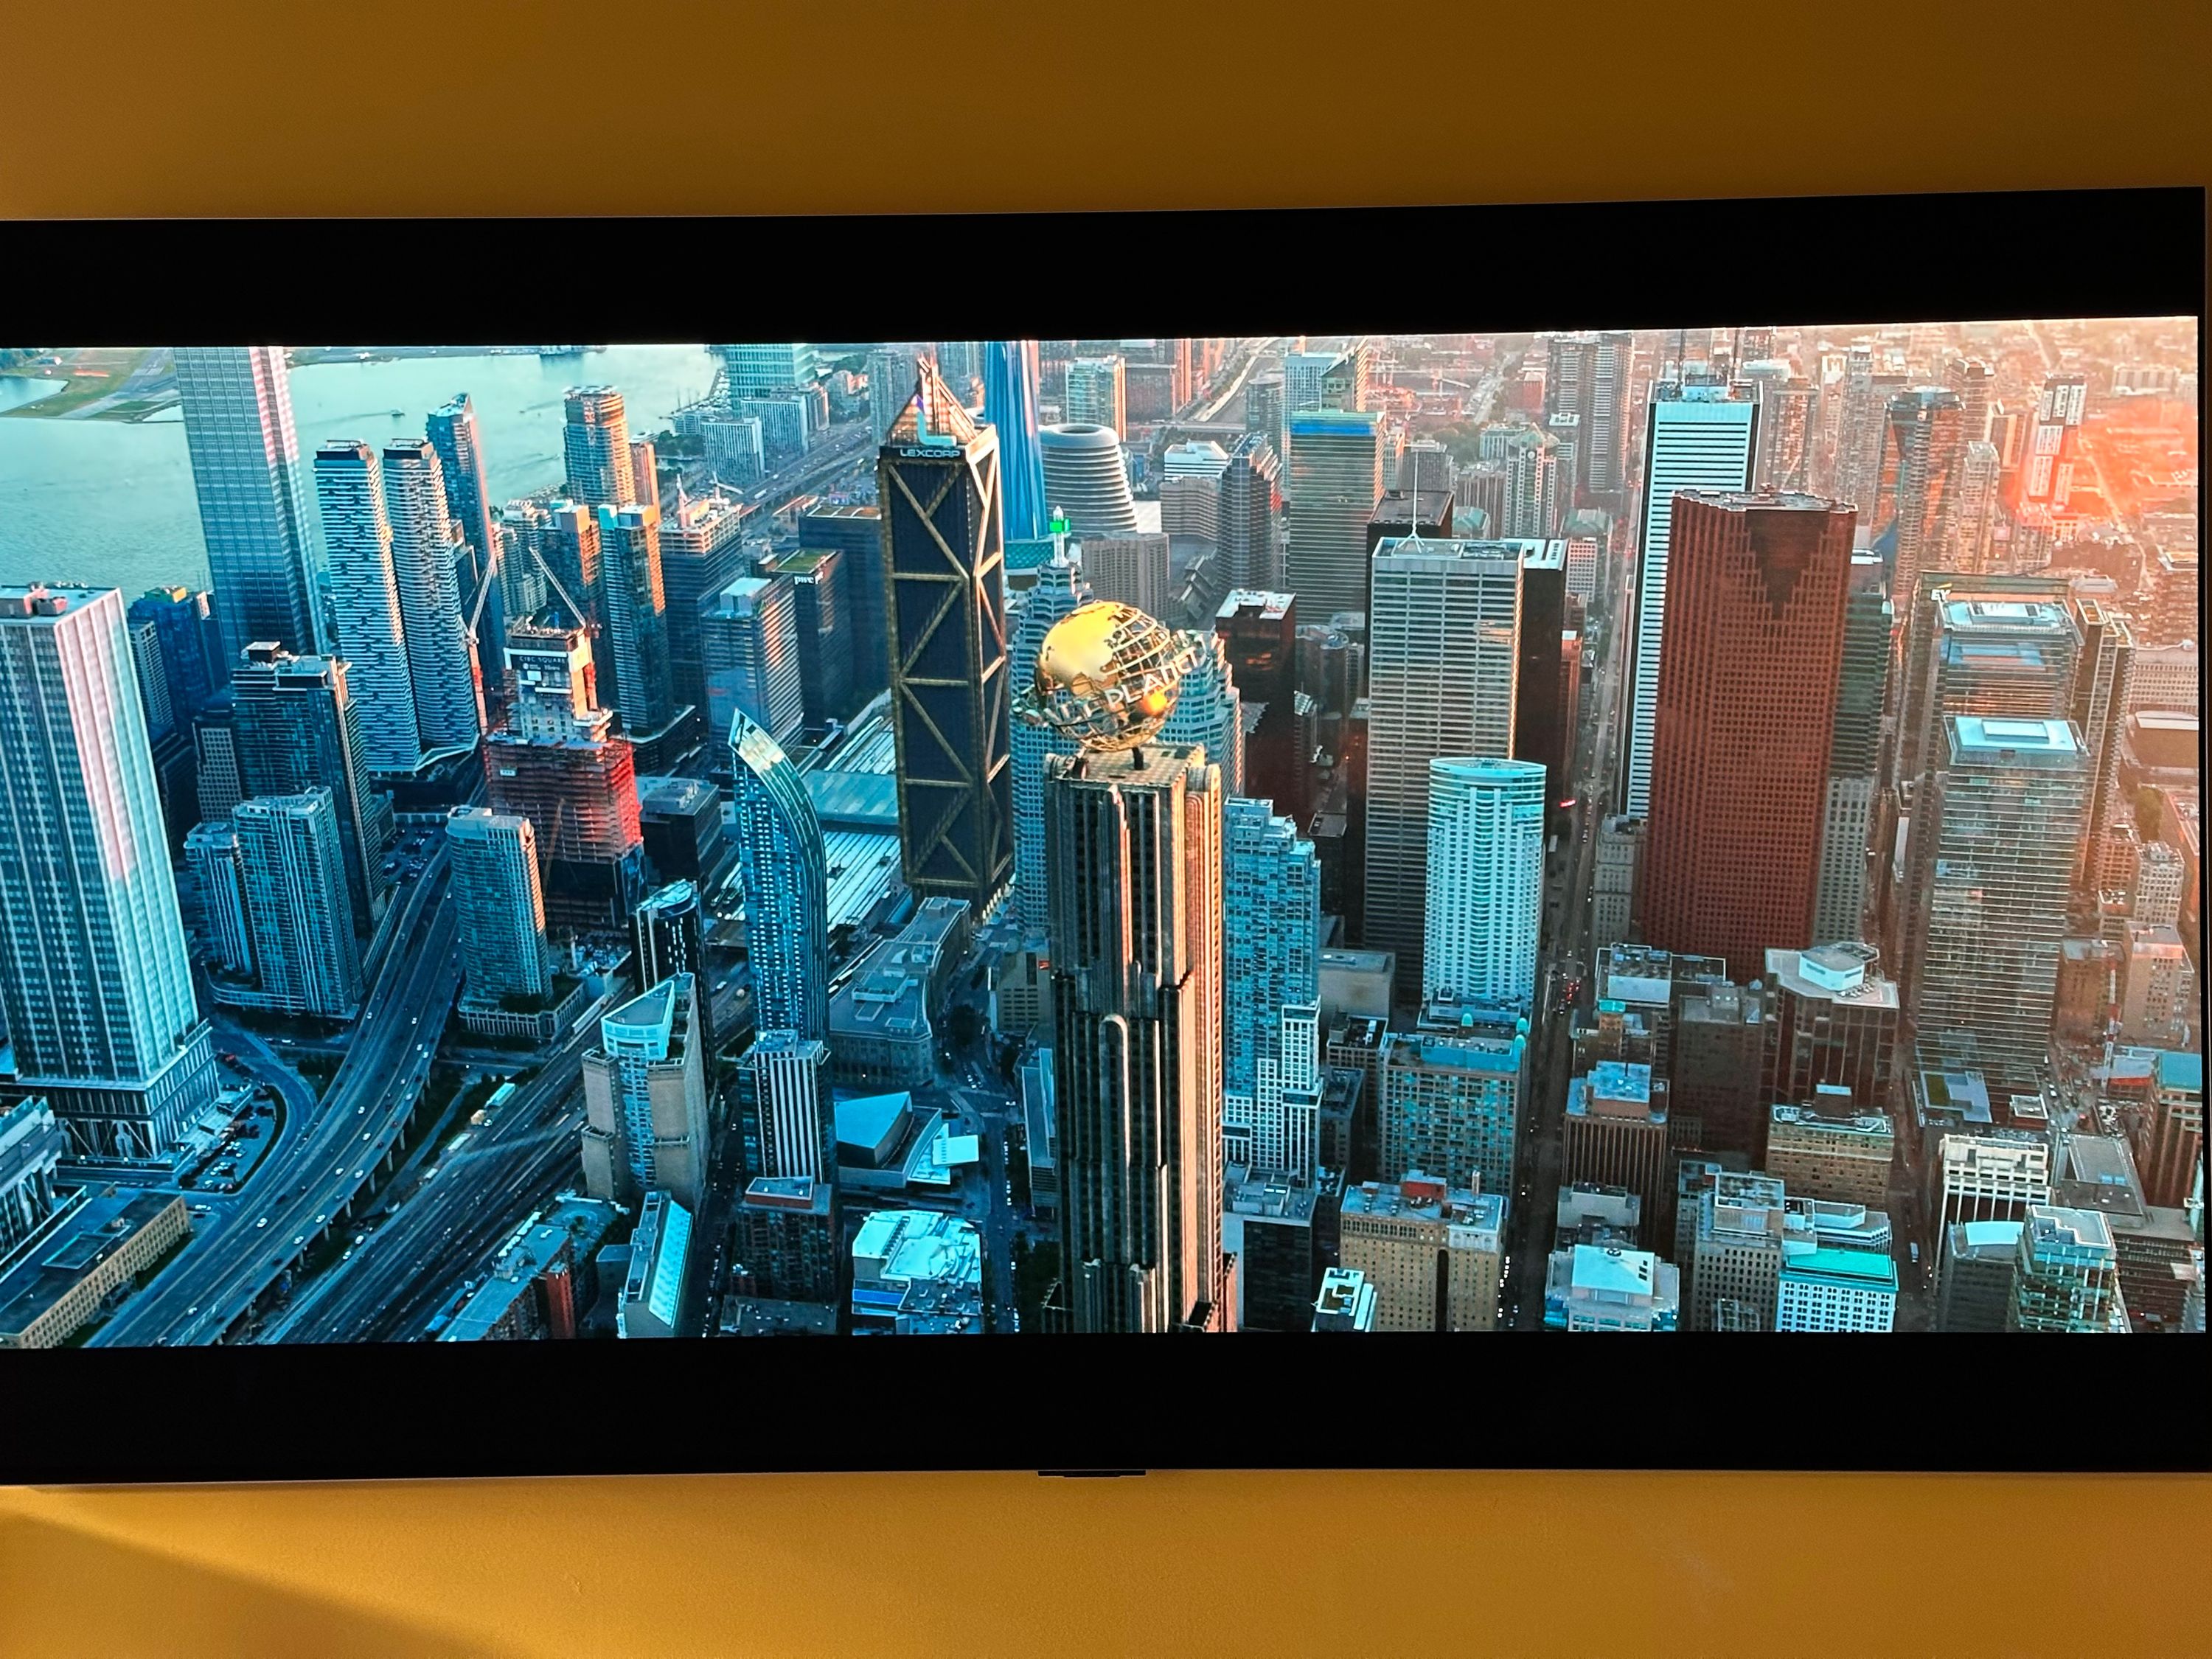 Picture of a television showing the city of Metropolis skyline from the Titans television show on HBO Max. The Daily Planet and LexCorp buildings are clearly shown in the middle.